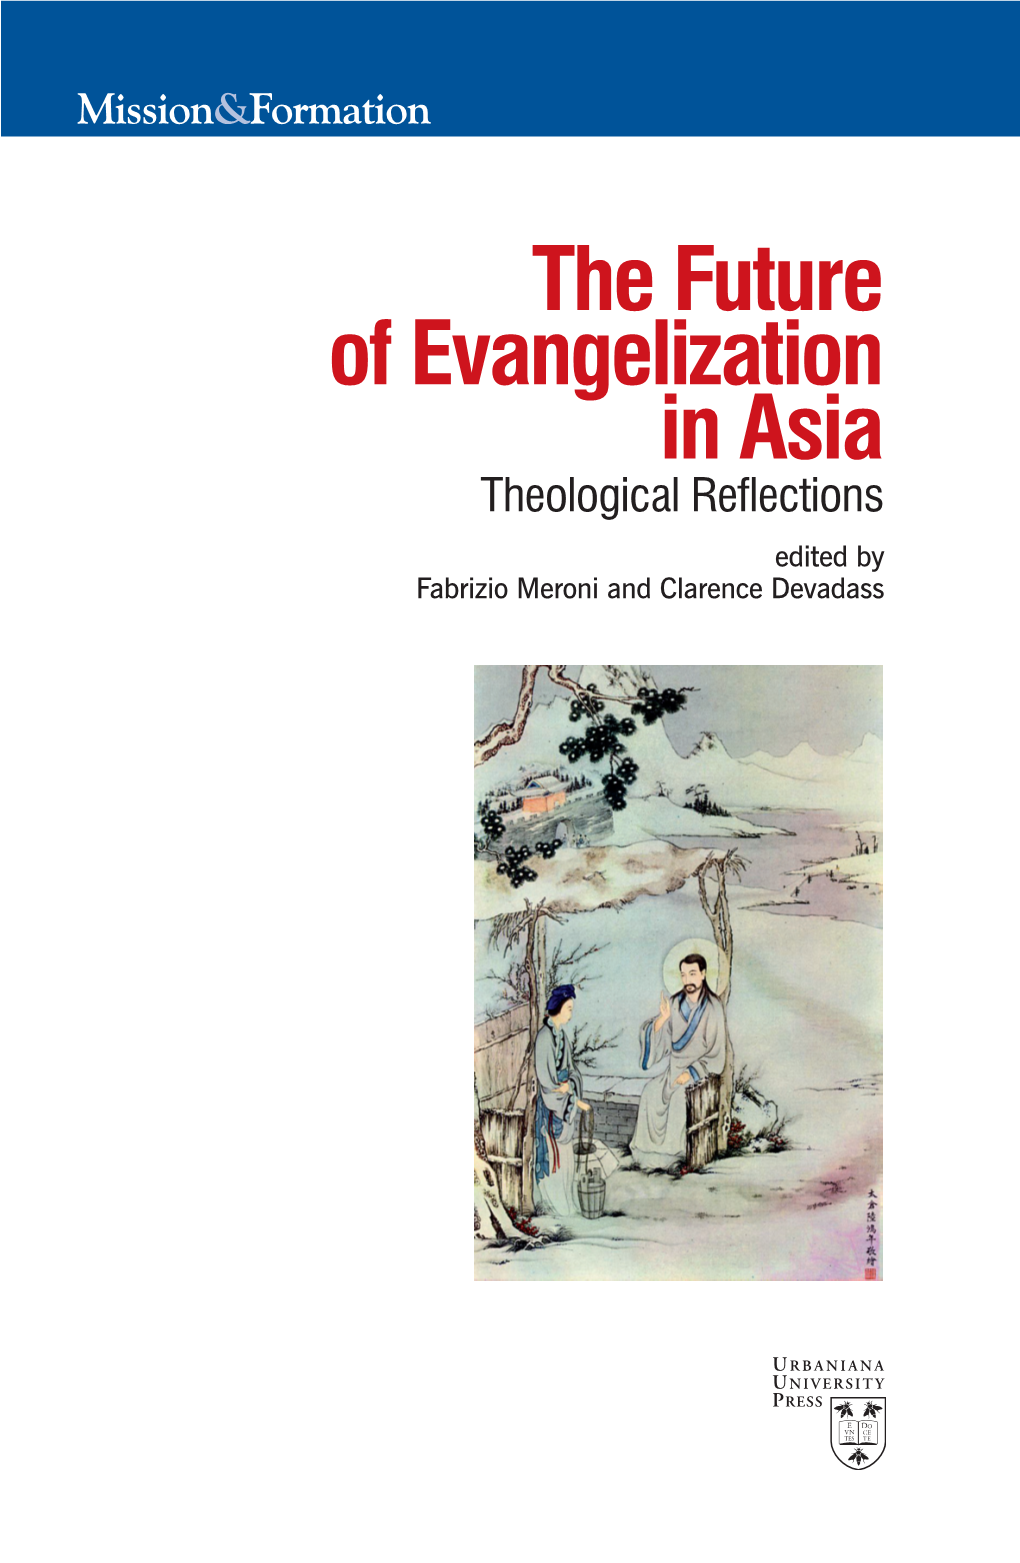 The Future of Evangelization in Asia Theological Reflections Edited by Fabrizio Meroni and Clarence Devadass